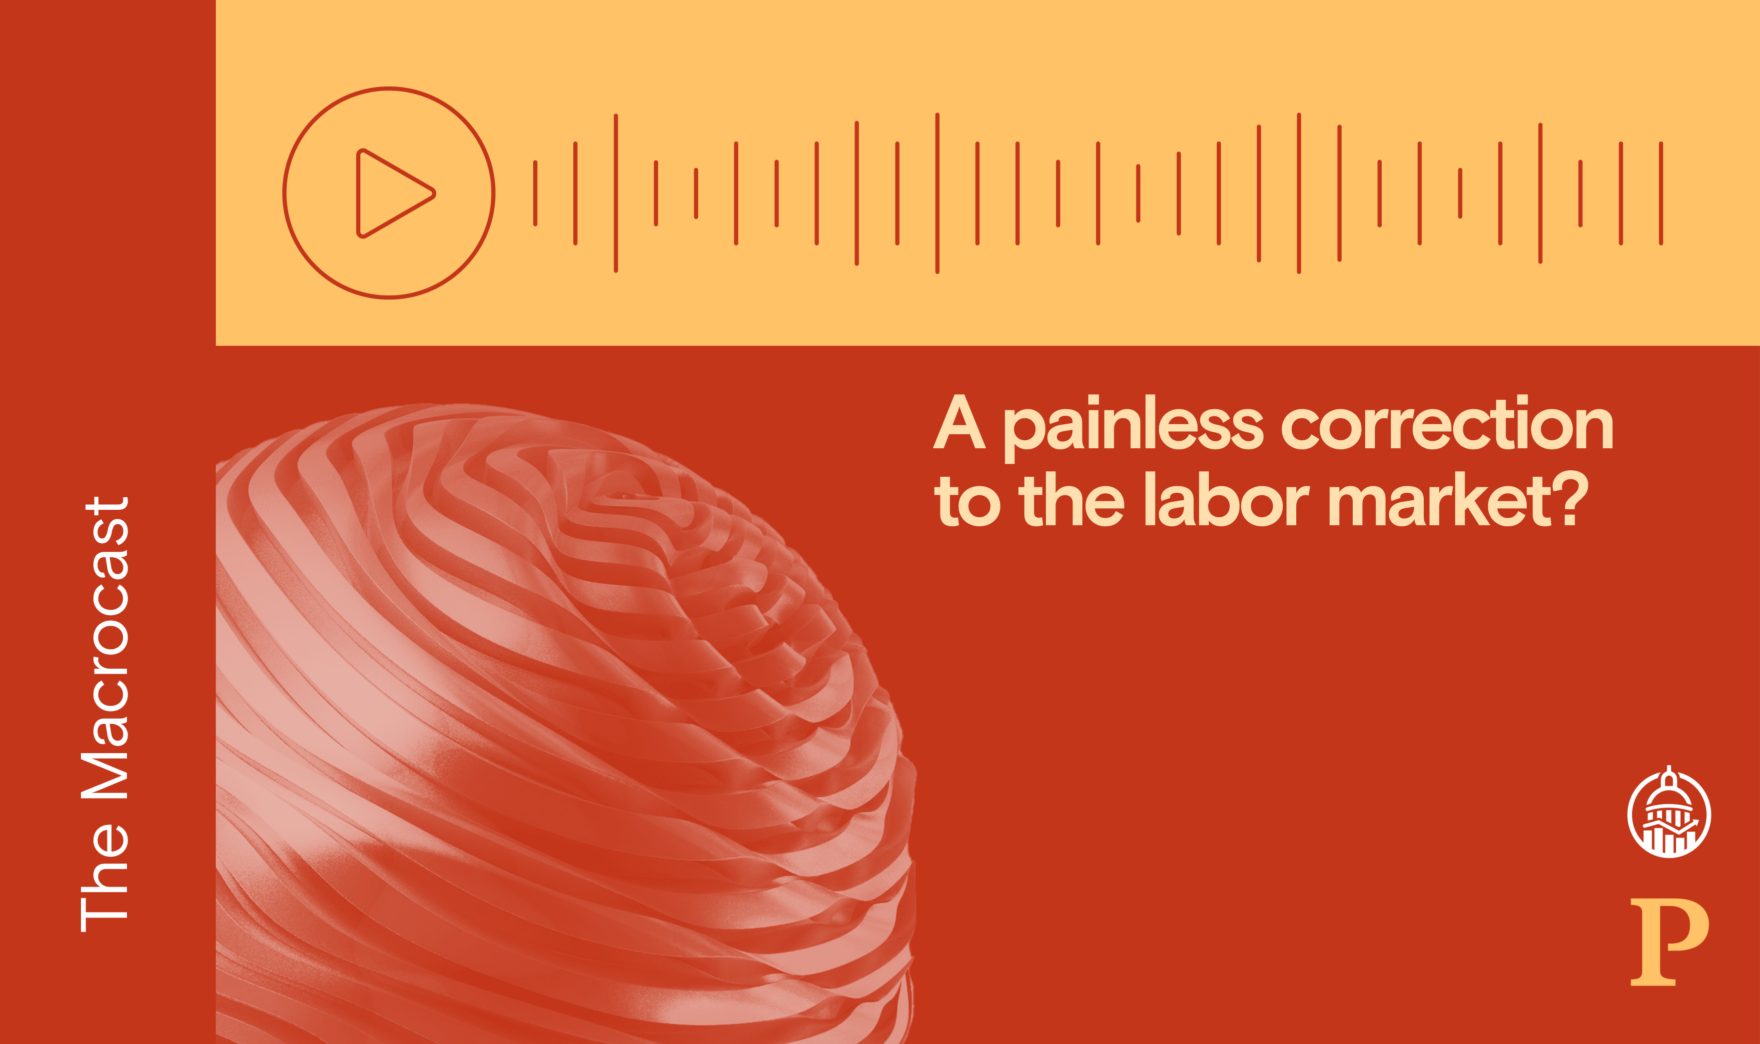 Macrocast: A painless correction to the labor market?